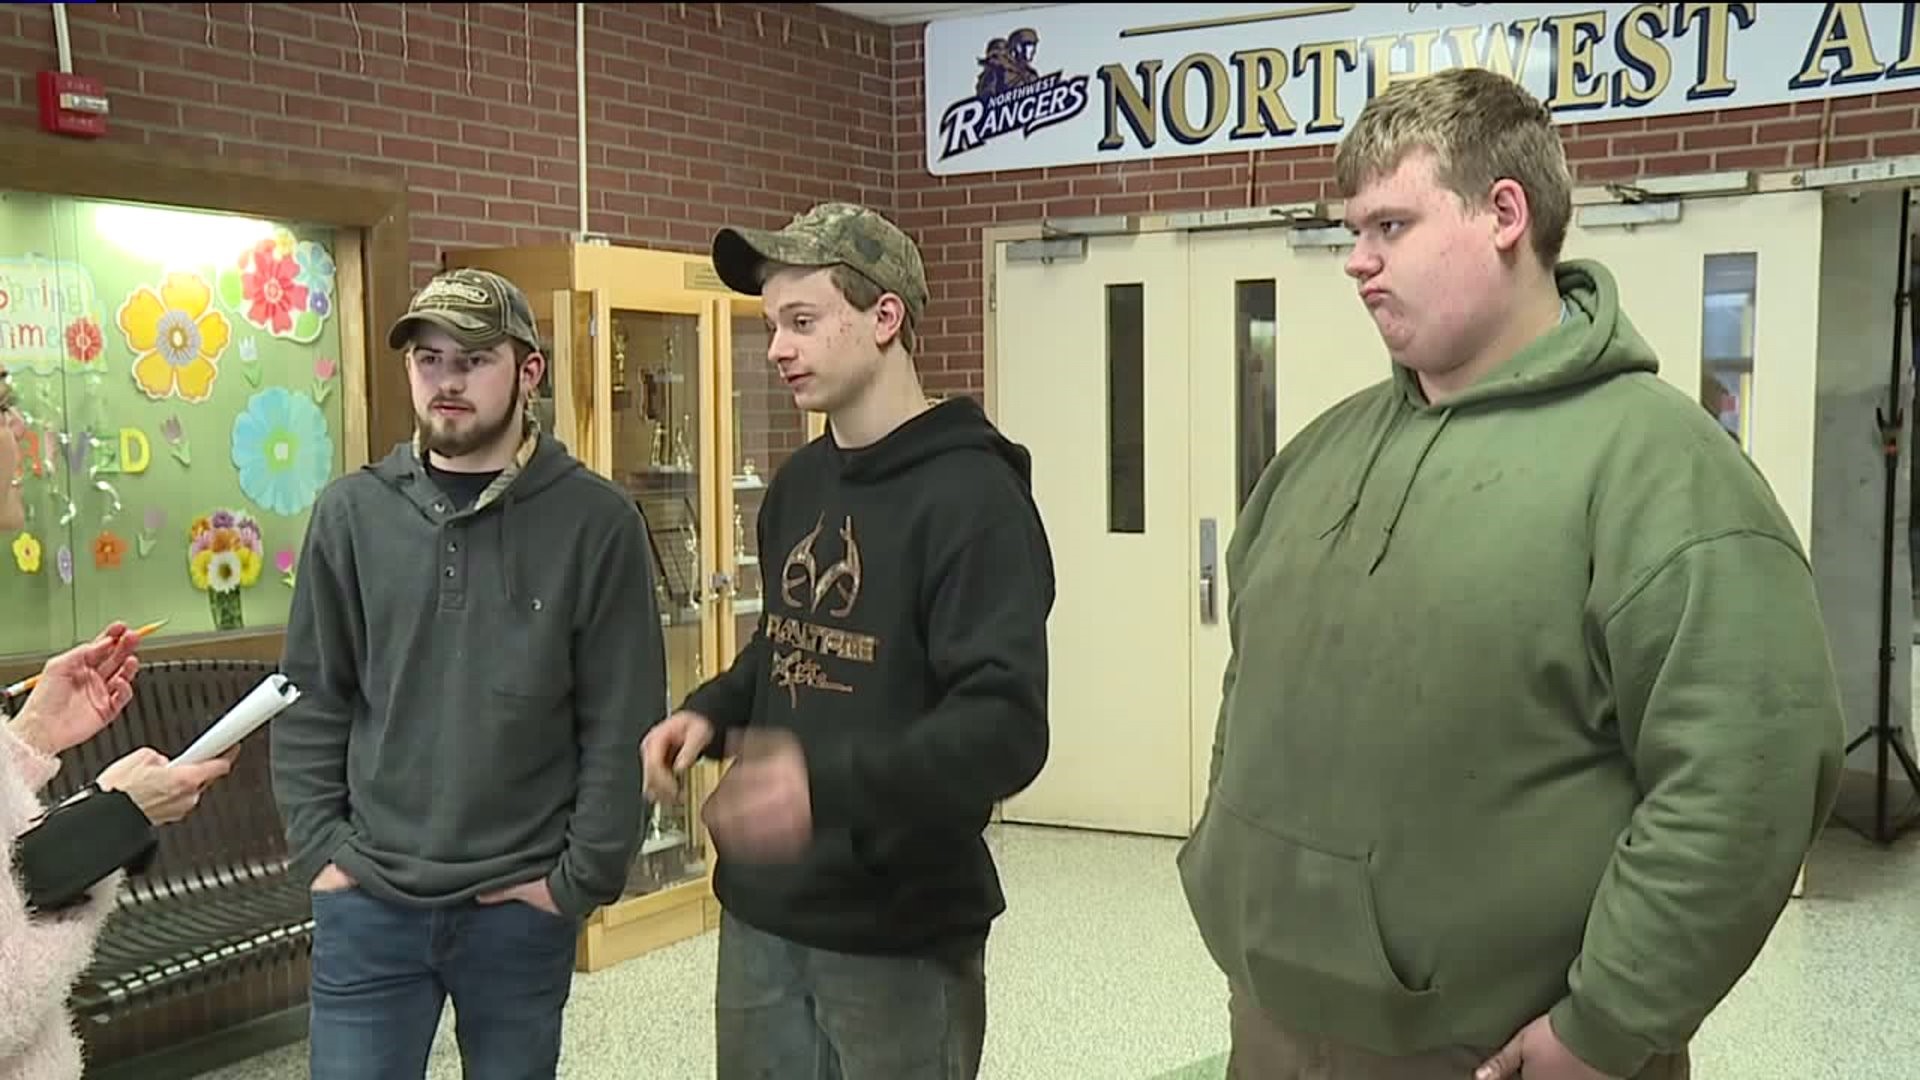 Three Northwest Area Students Hailed as "High School Heroes" for Brave Actions